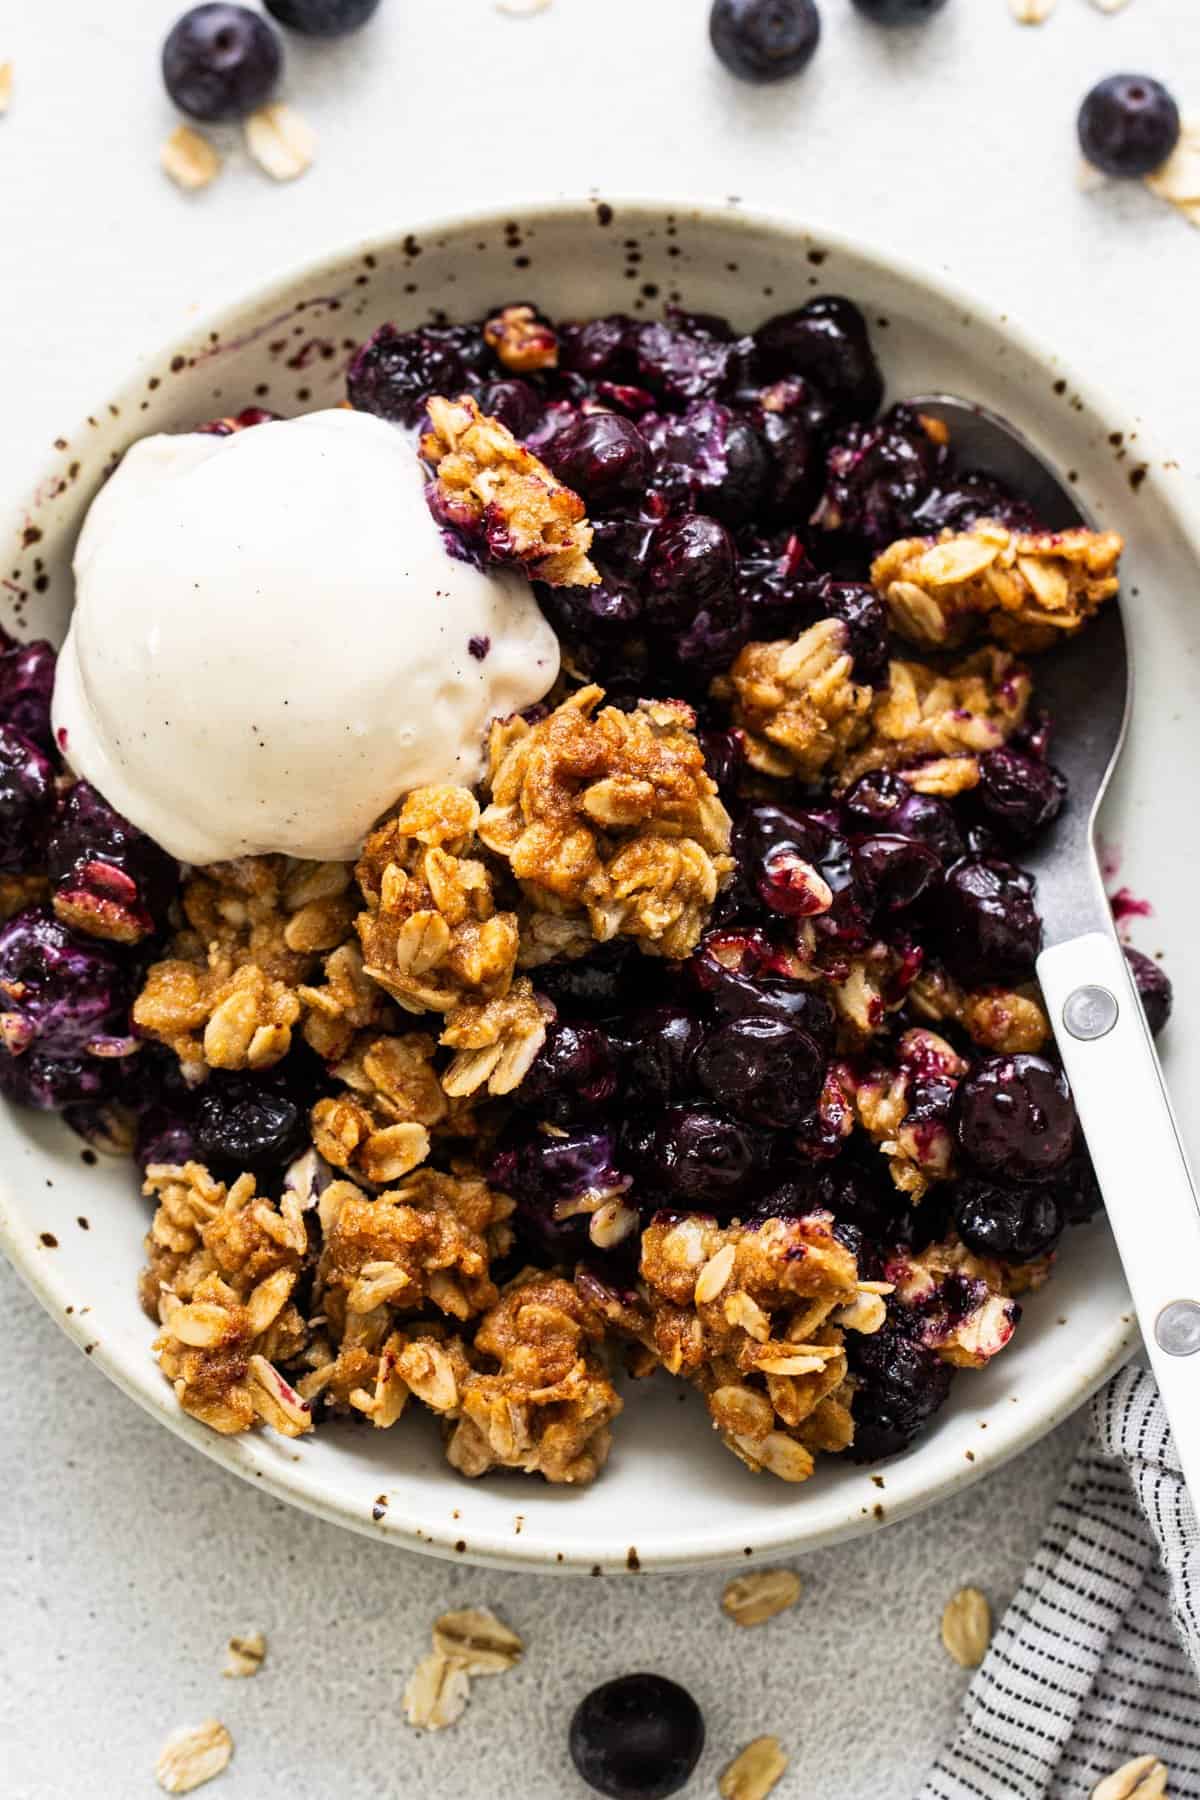 A bowl of blueberry crumble topped with a scoop of vanilla ice cream.